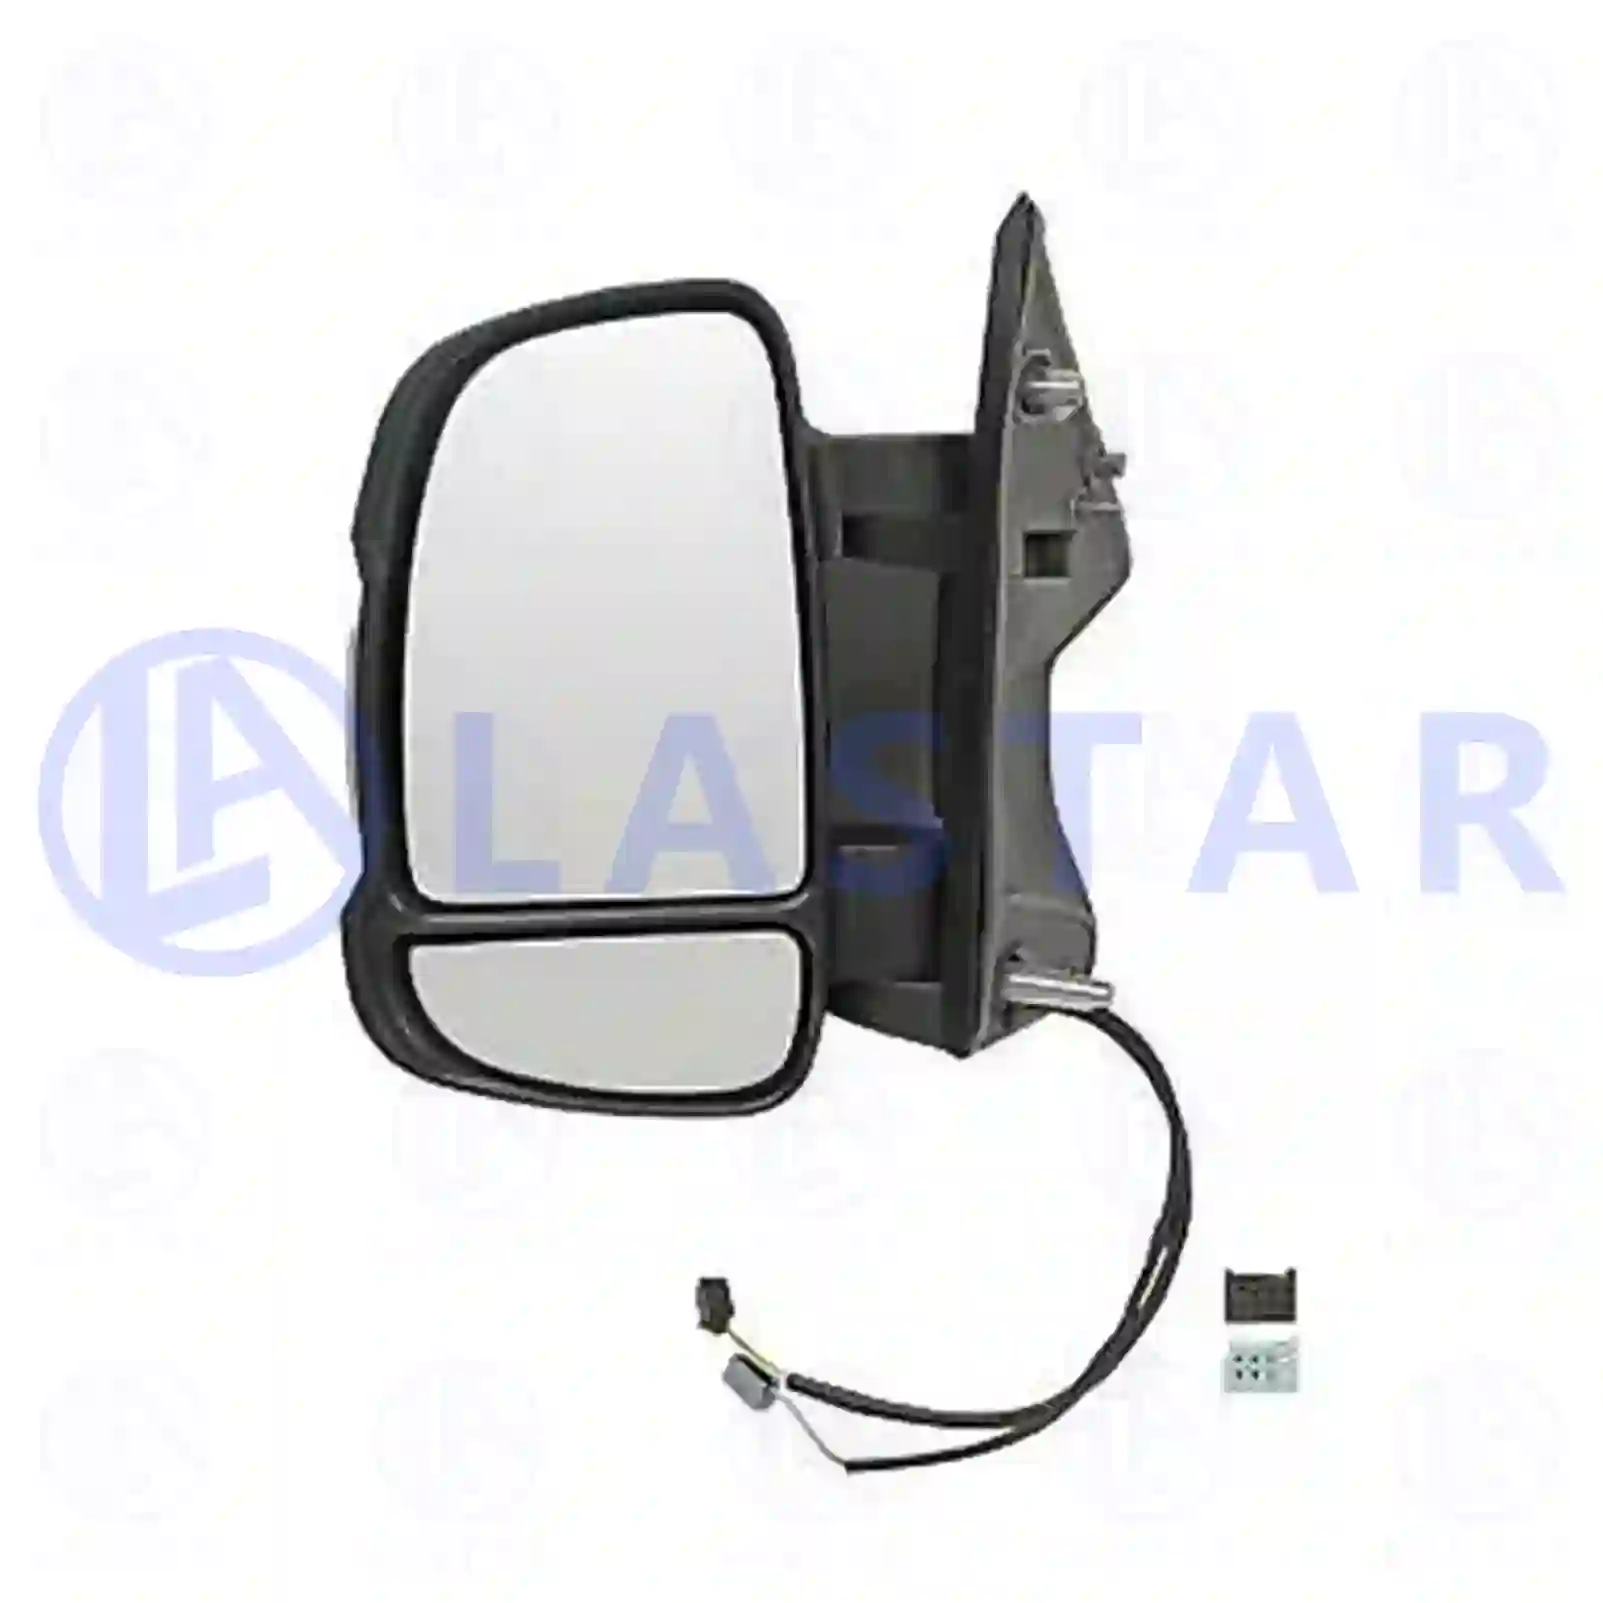 Main mirror, left, with temperature sensor, 77721378, 1613693580, 8154NH, 735424438, 735440427, 735480944, 735517083, 735620755, 1613693580, 8154NH ||  77721378 Lastar Spare Part | Truck Spare Parts, Auotomotive Spare Parts Main mirror, left, with temperature sensor, 77721378, 1613693580, 8154NH, 735424438, 735440427, 735480944, 735517083, 735620755, 1613693580, 8154NH ||  77721378 Lastar Spare Part | Truck Spare Parts, Auotomotive Spare Parts